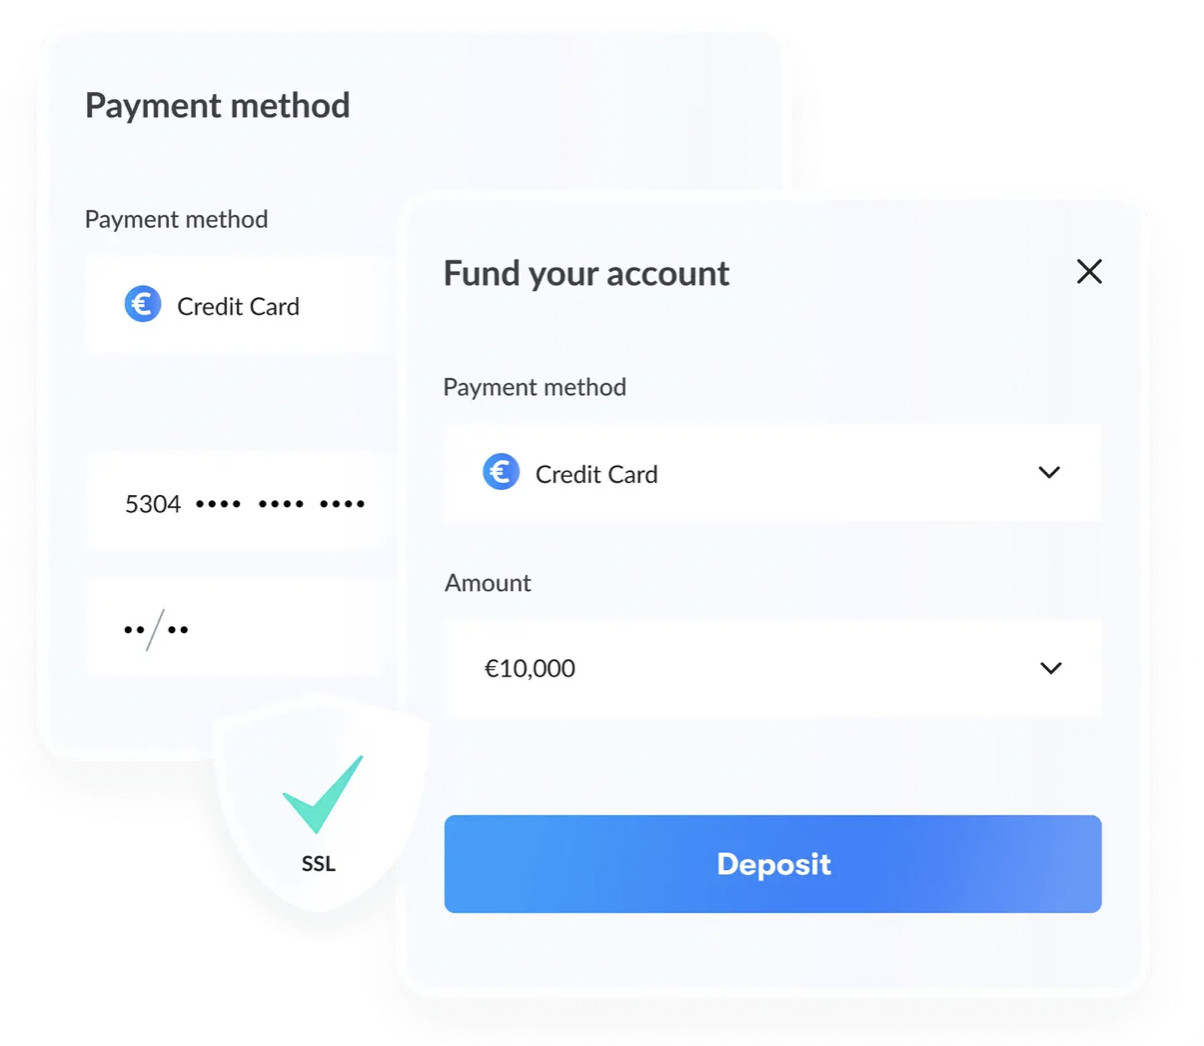 The deposit process at NAGA is simple and intuitive